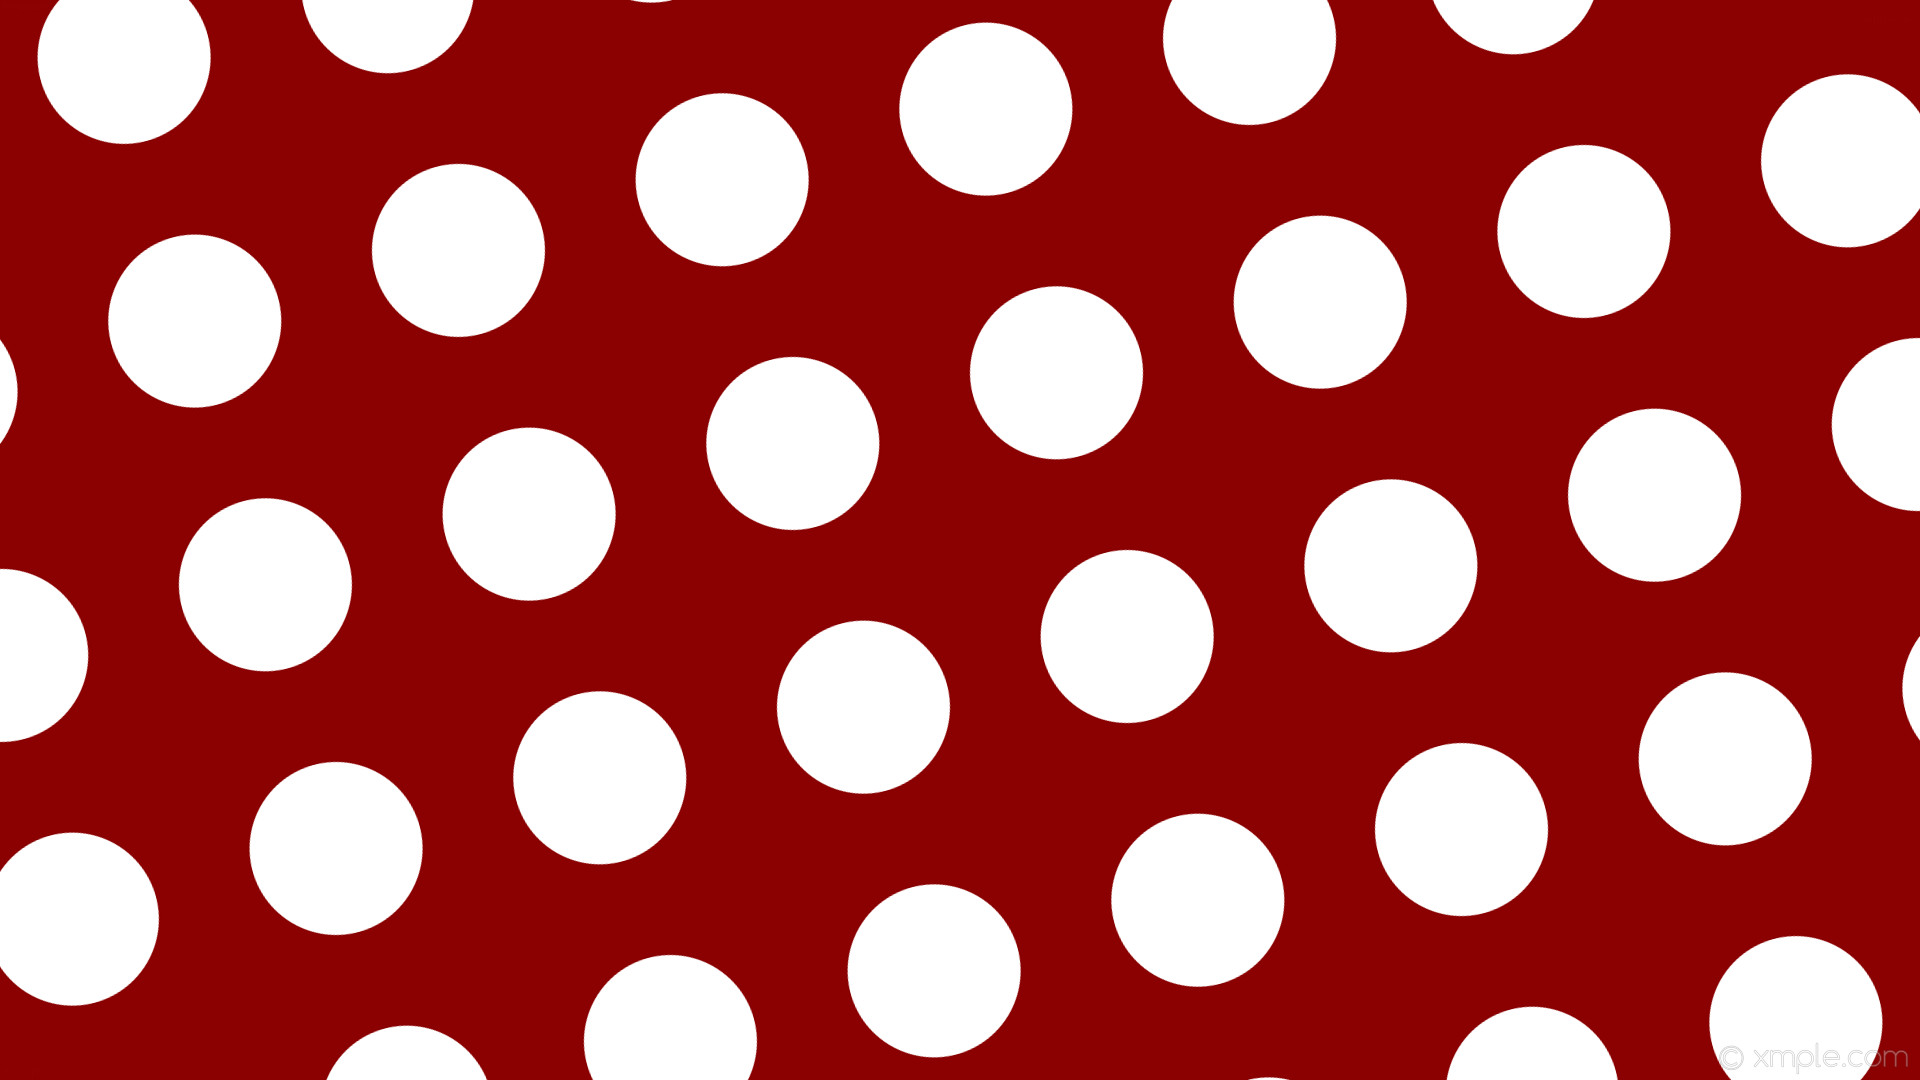 Red And White Polka Dot Wallpapers